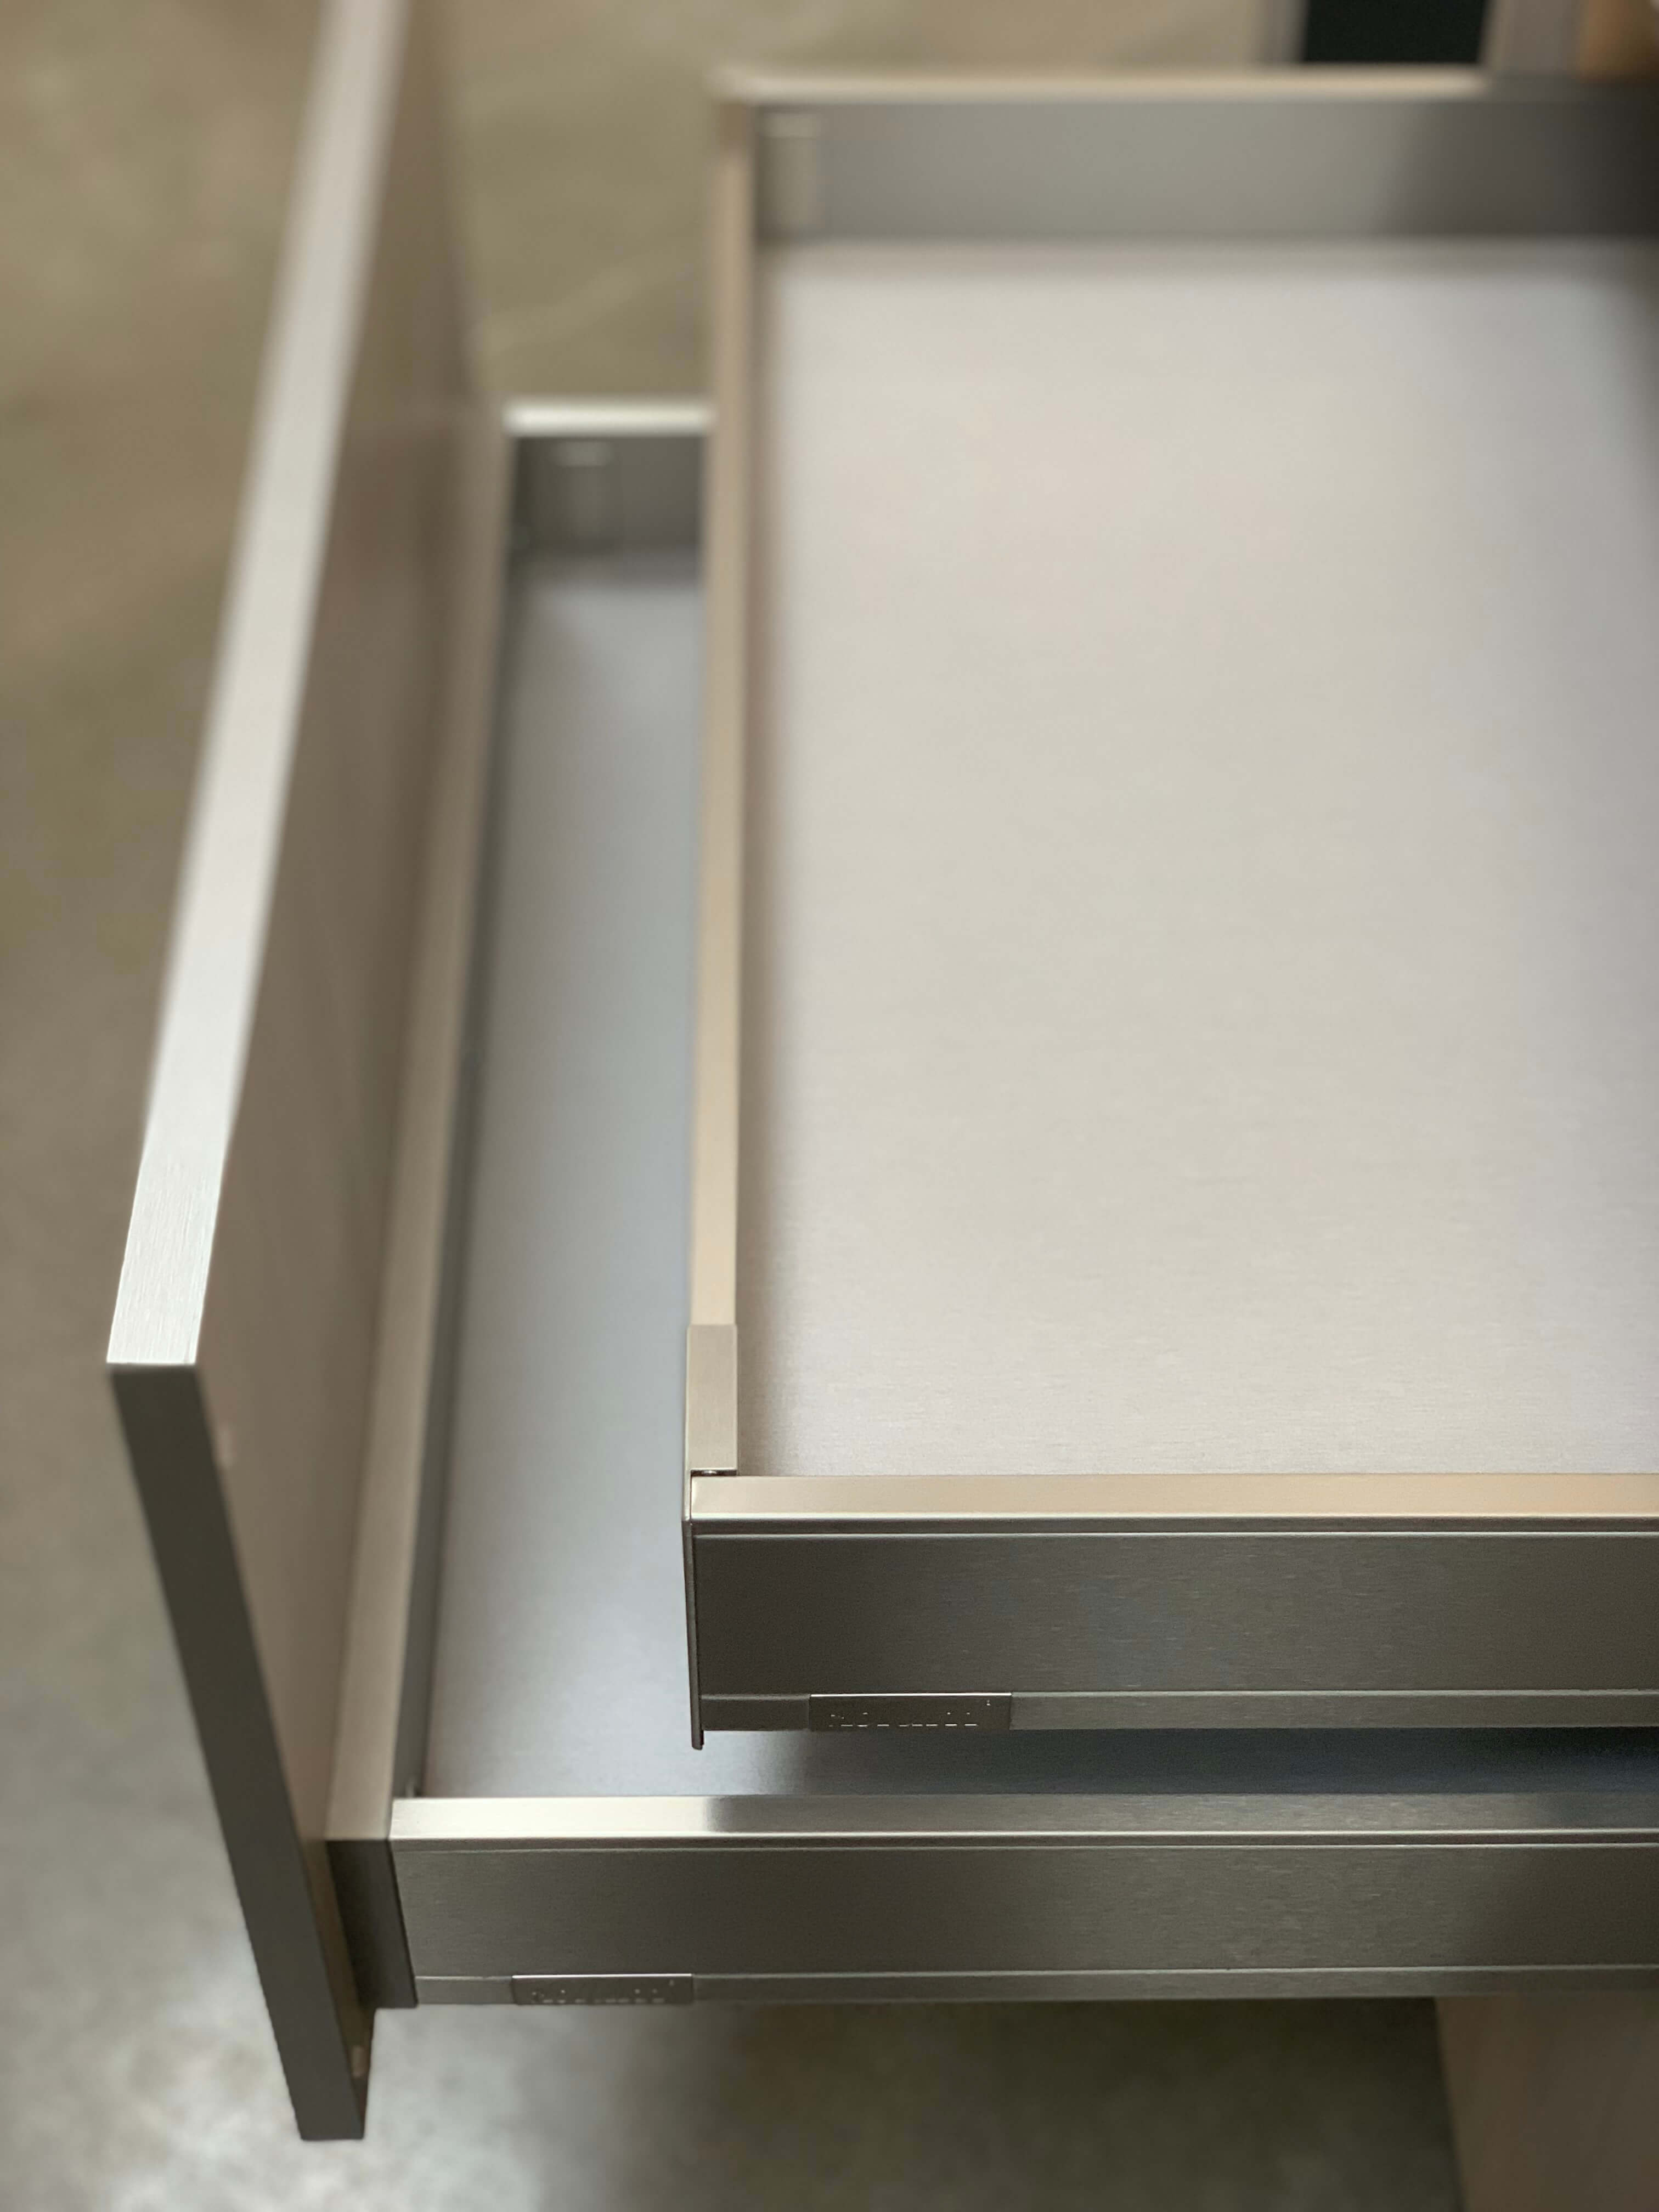 Legrabox steel drawers add space, durability and extend the life of your cabinetry. See here on display at Beck/Allen Cabinetry in St. Louis, MO.